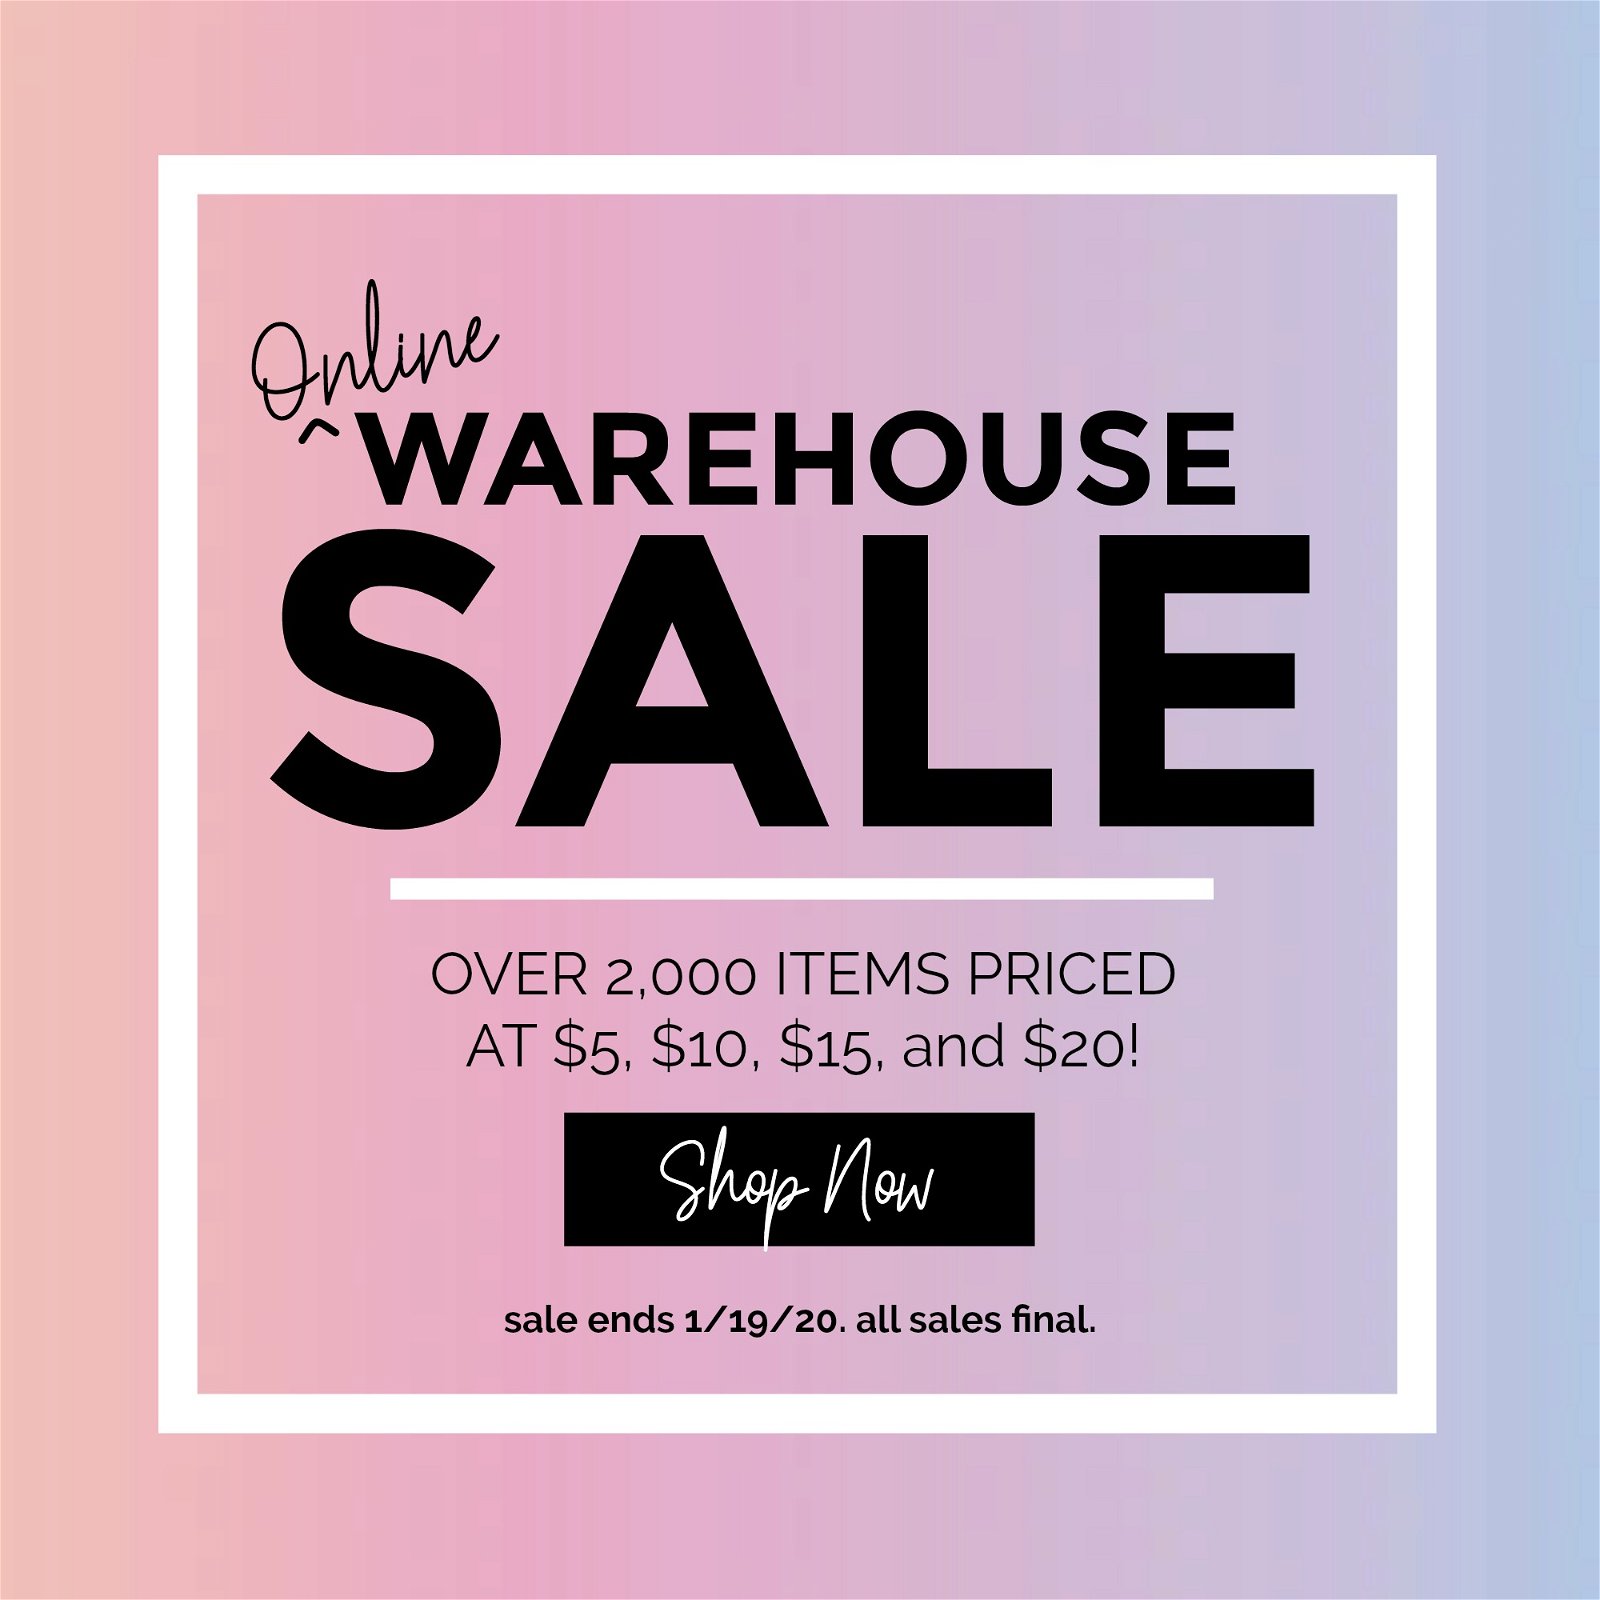 red dress warehouse sale